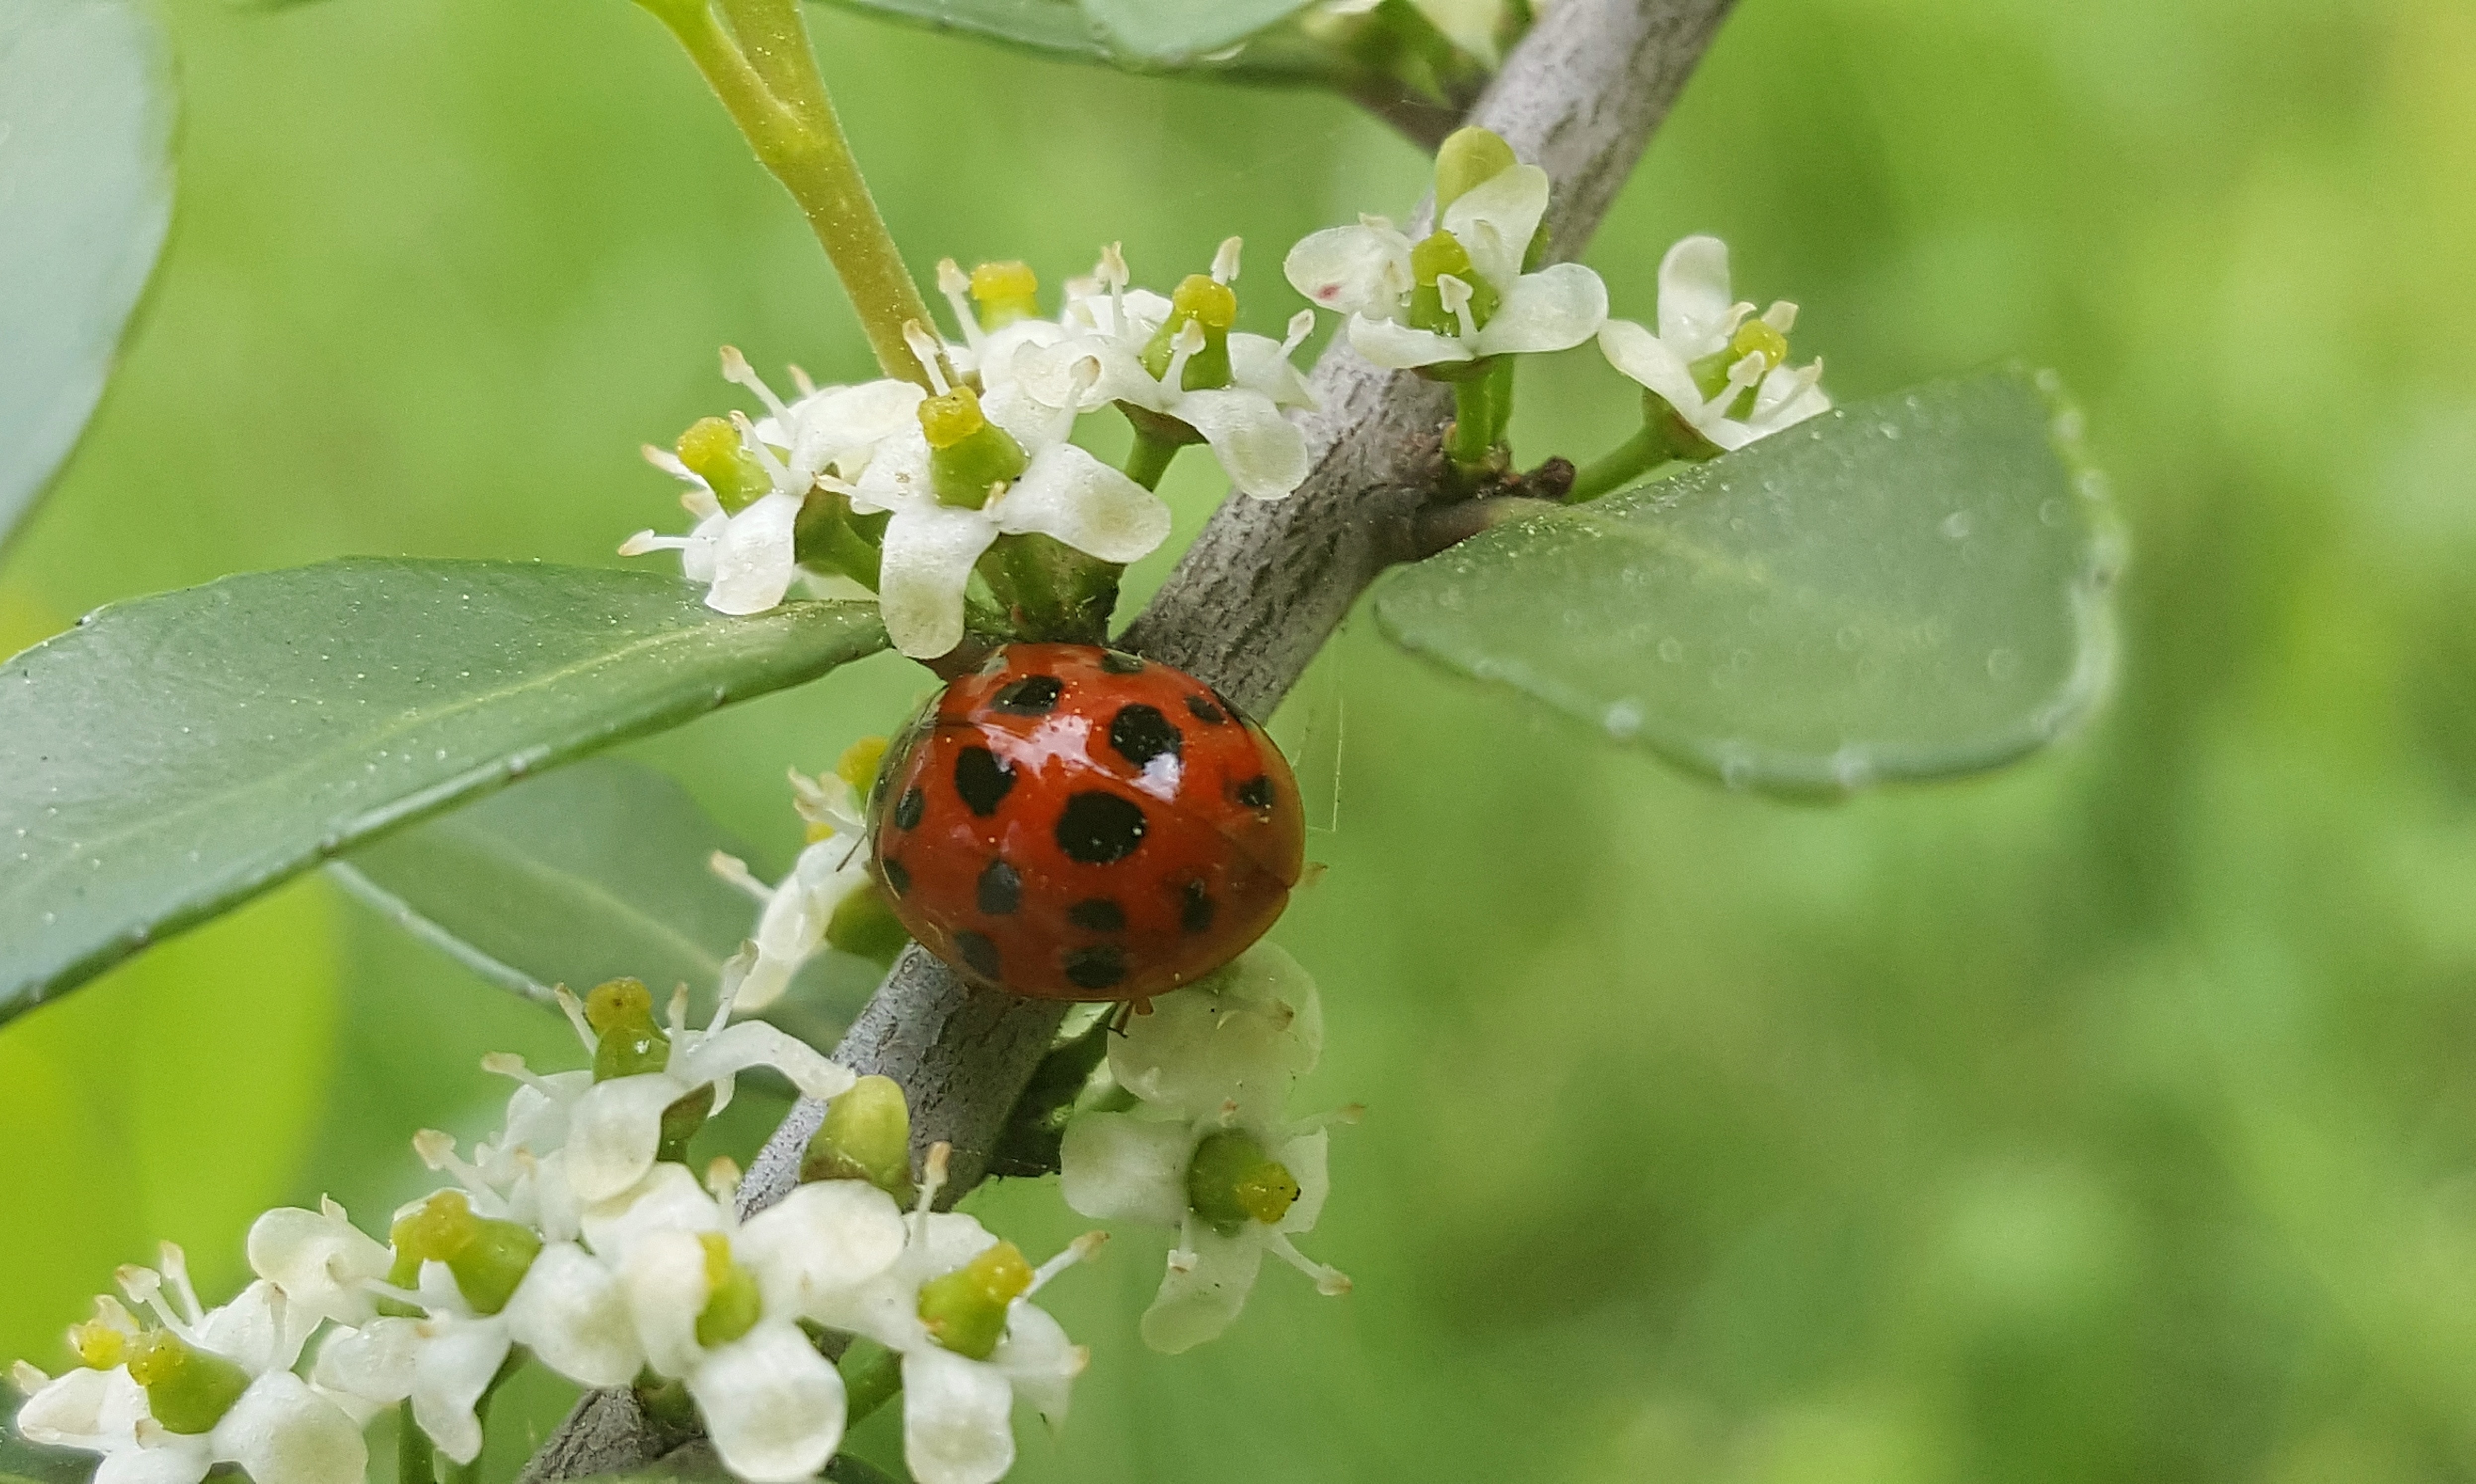 spotted red ladybug